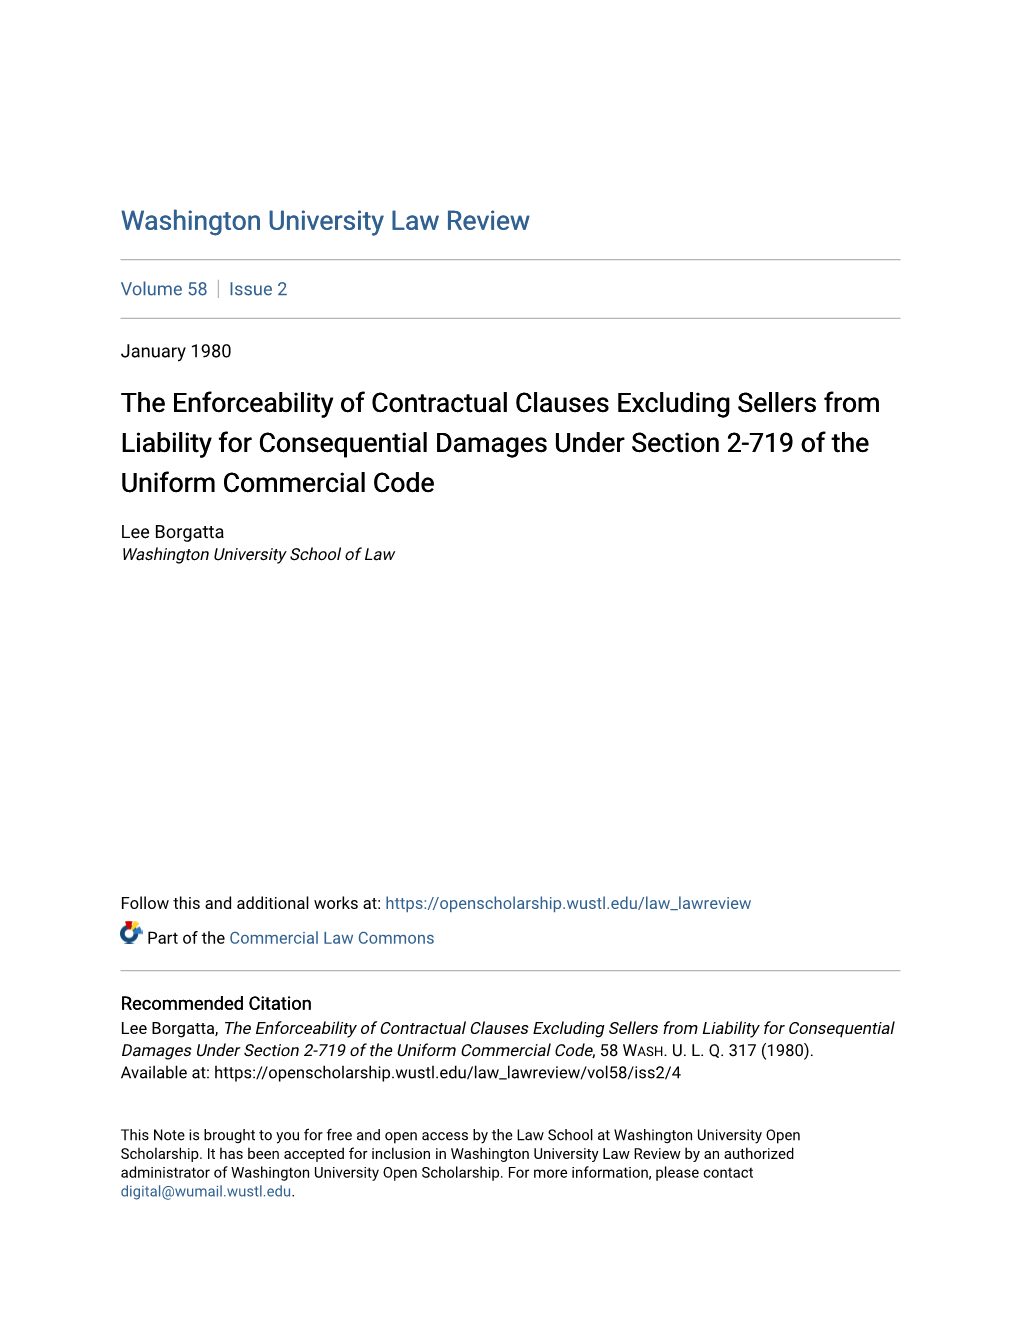 The Enforceability of Contractual Clauses Excluding Sellers from Liability for Consequential Damages Under Section 2-719 of the Uniform Commercial Code